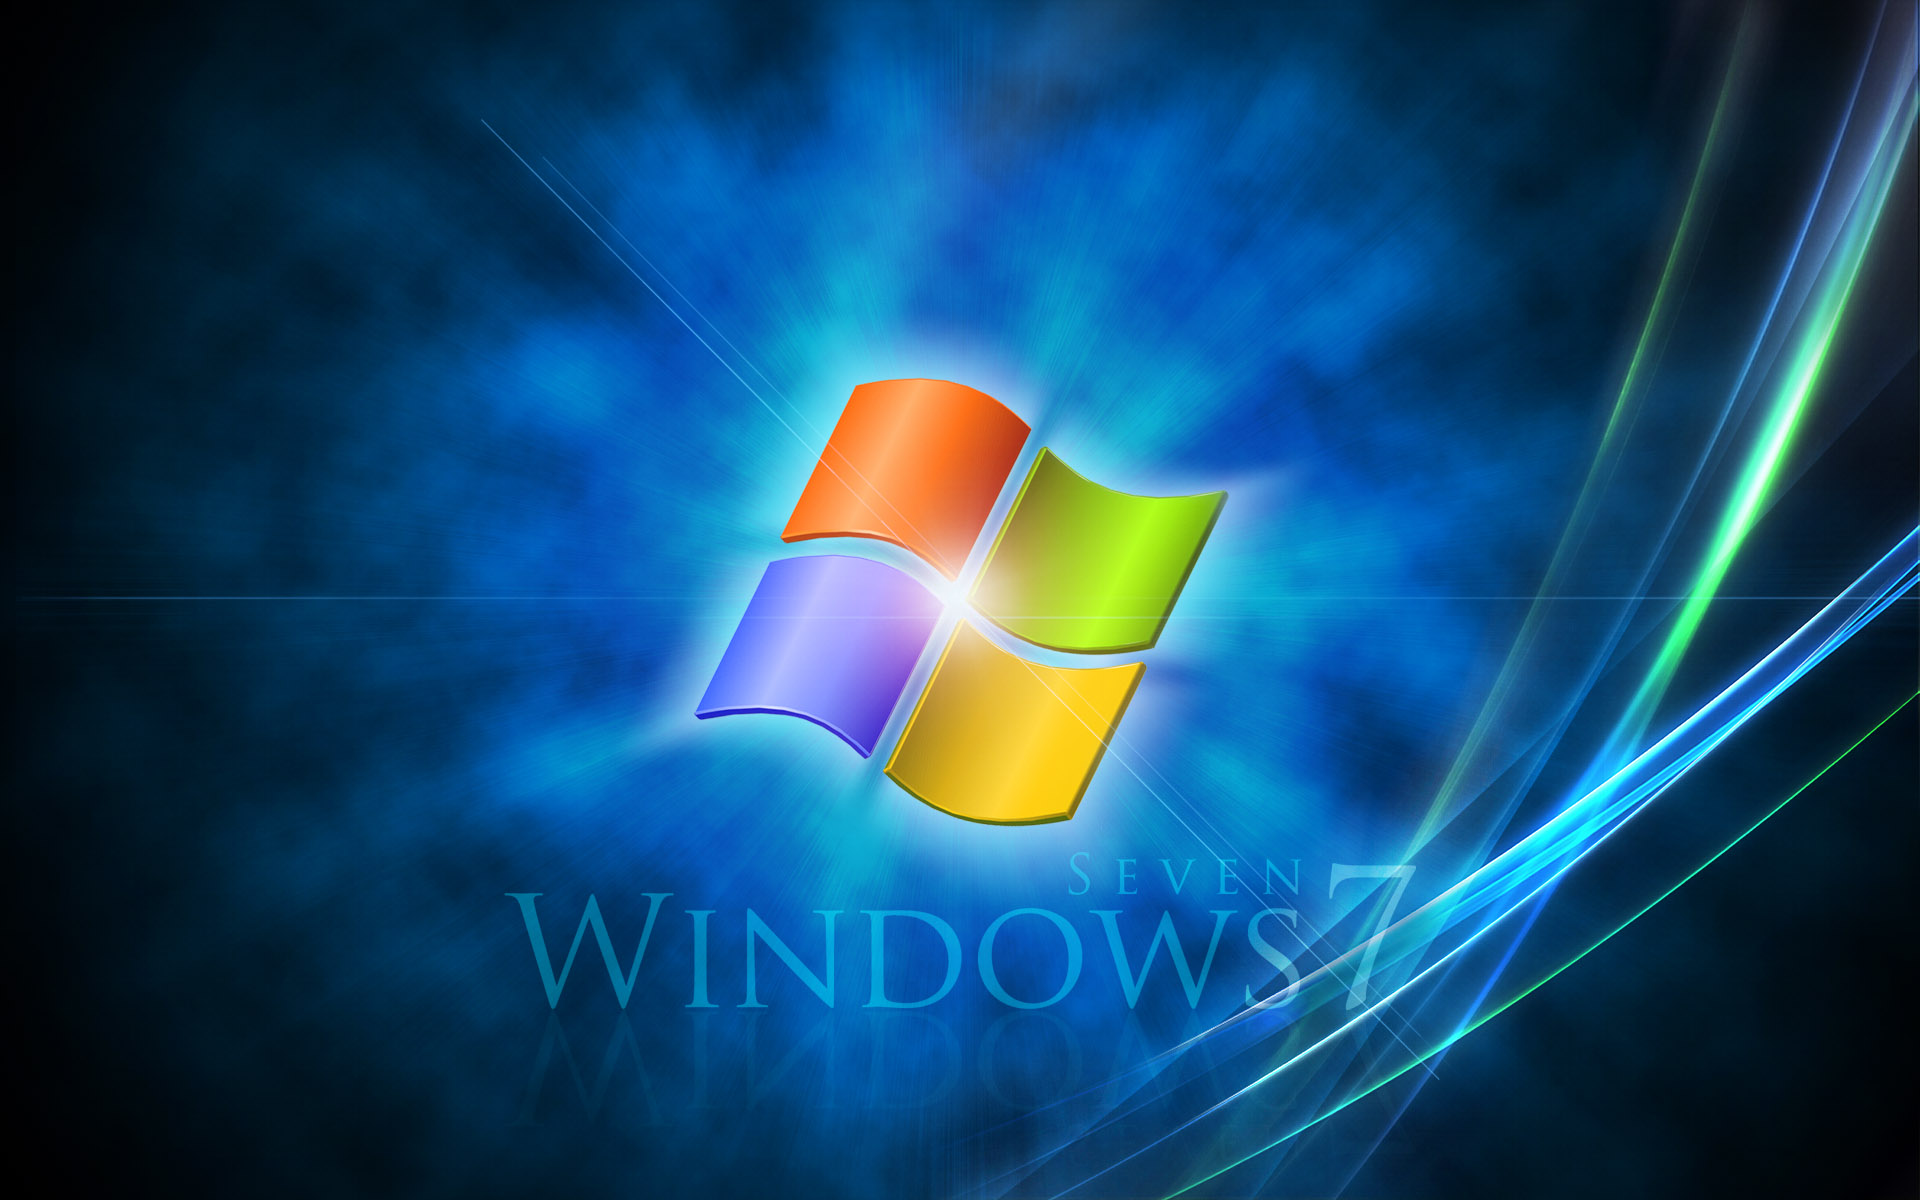 Windows 7 Ultimate Wallpapers